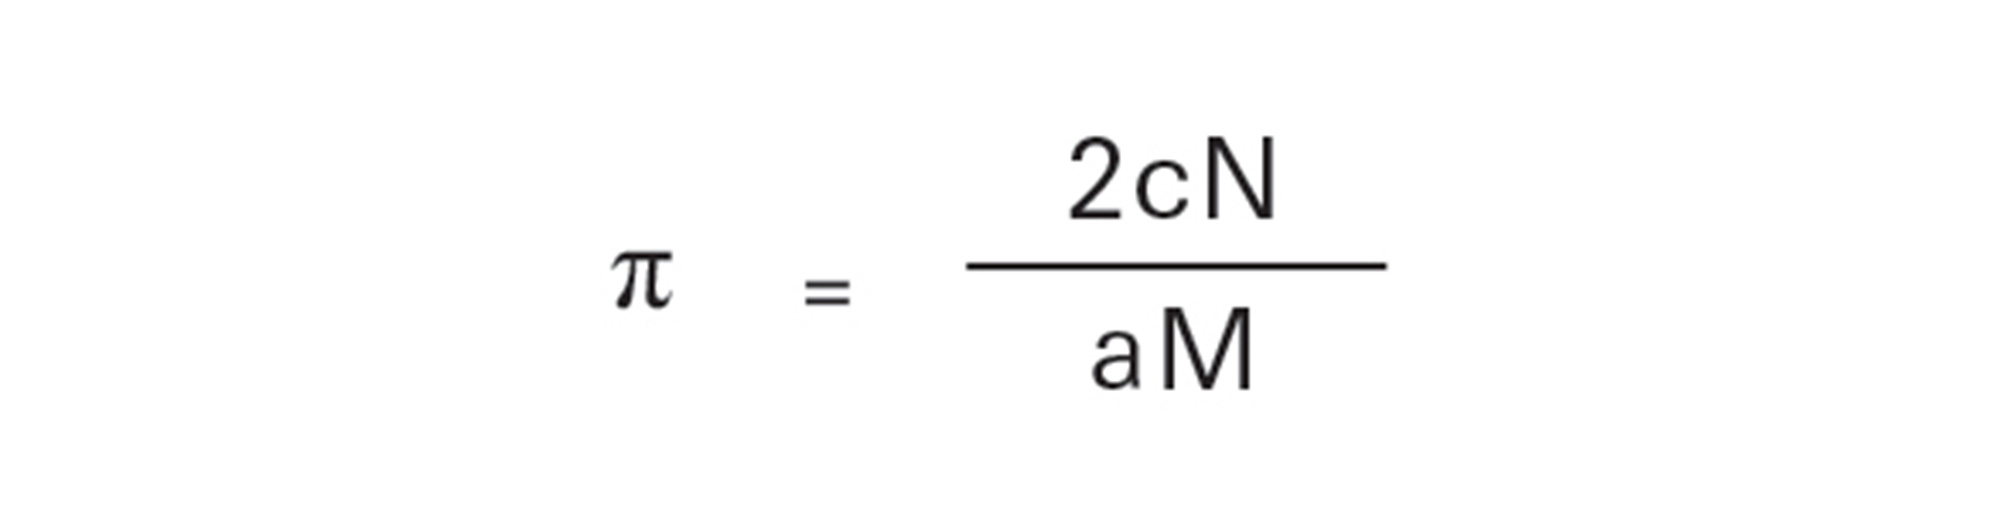 A mathematical equation that shows that pi is therefore equal to 2cN divided by aM.